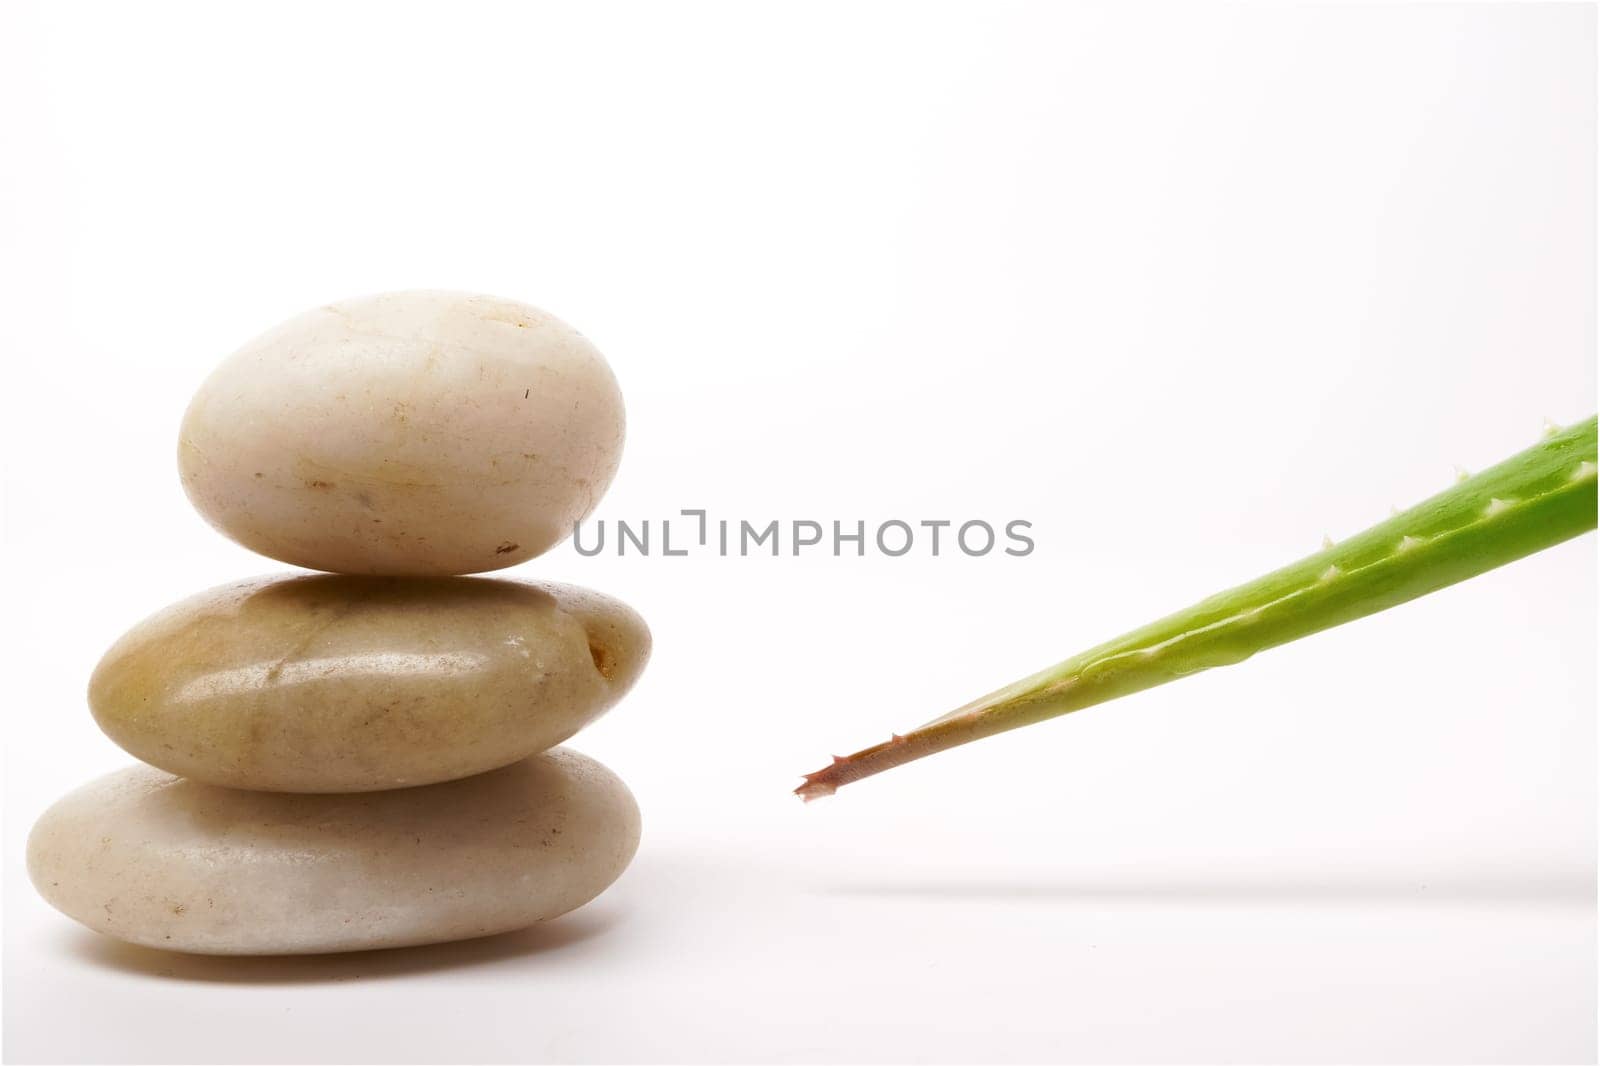 close-up of green aloe vera leaf with dewdrops and stacked stones isolated on white background